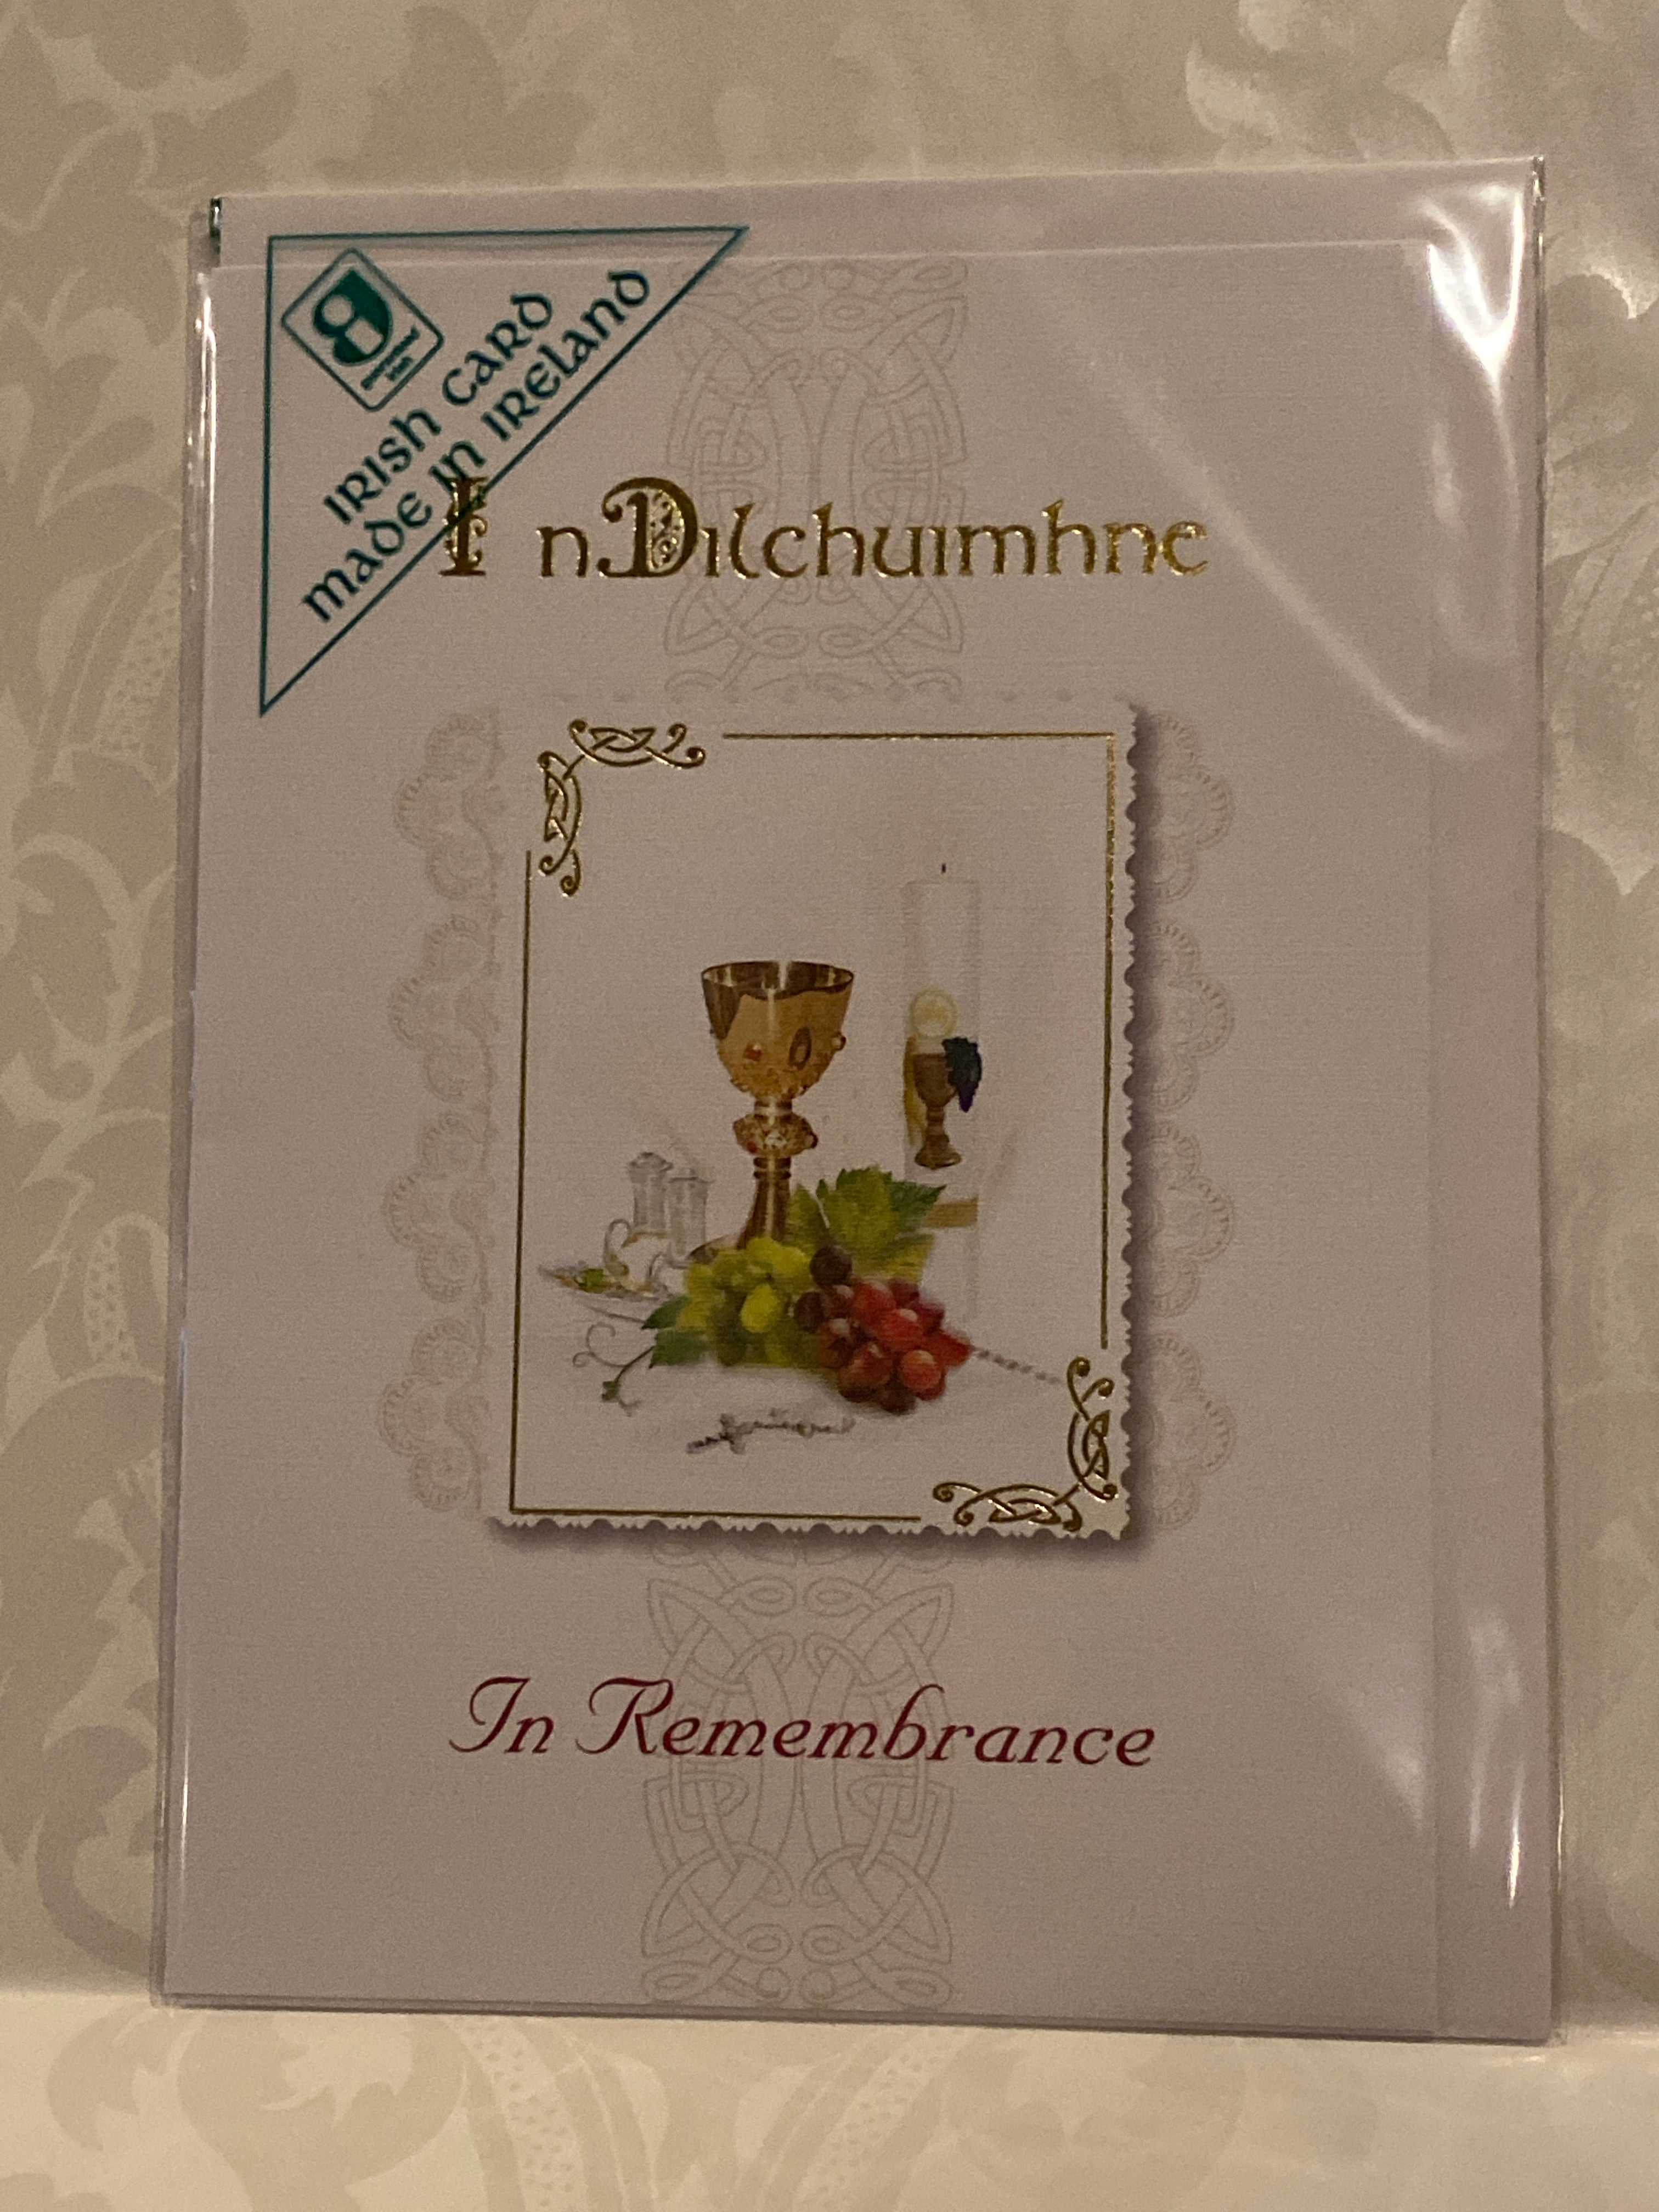 In remembrance card